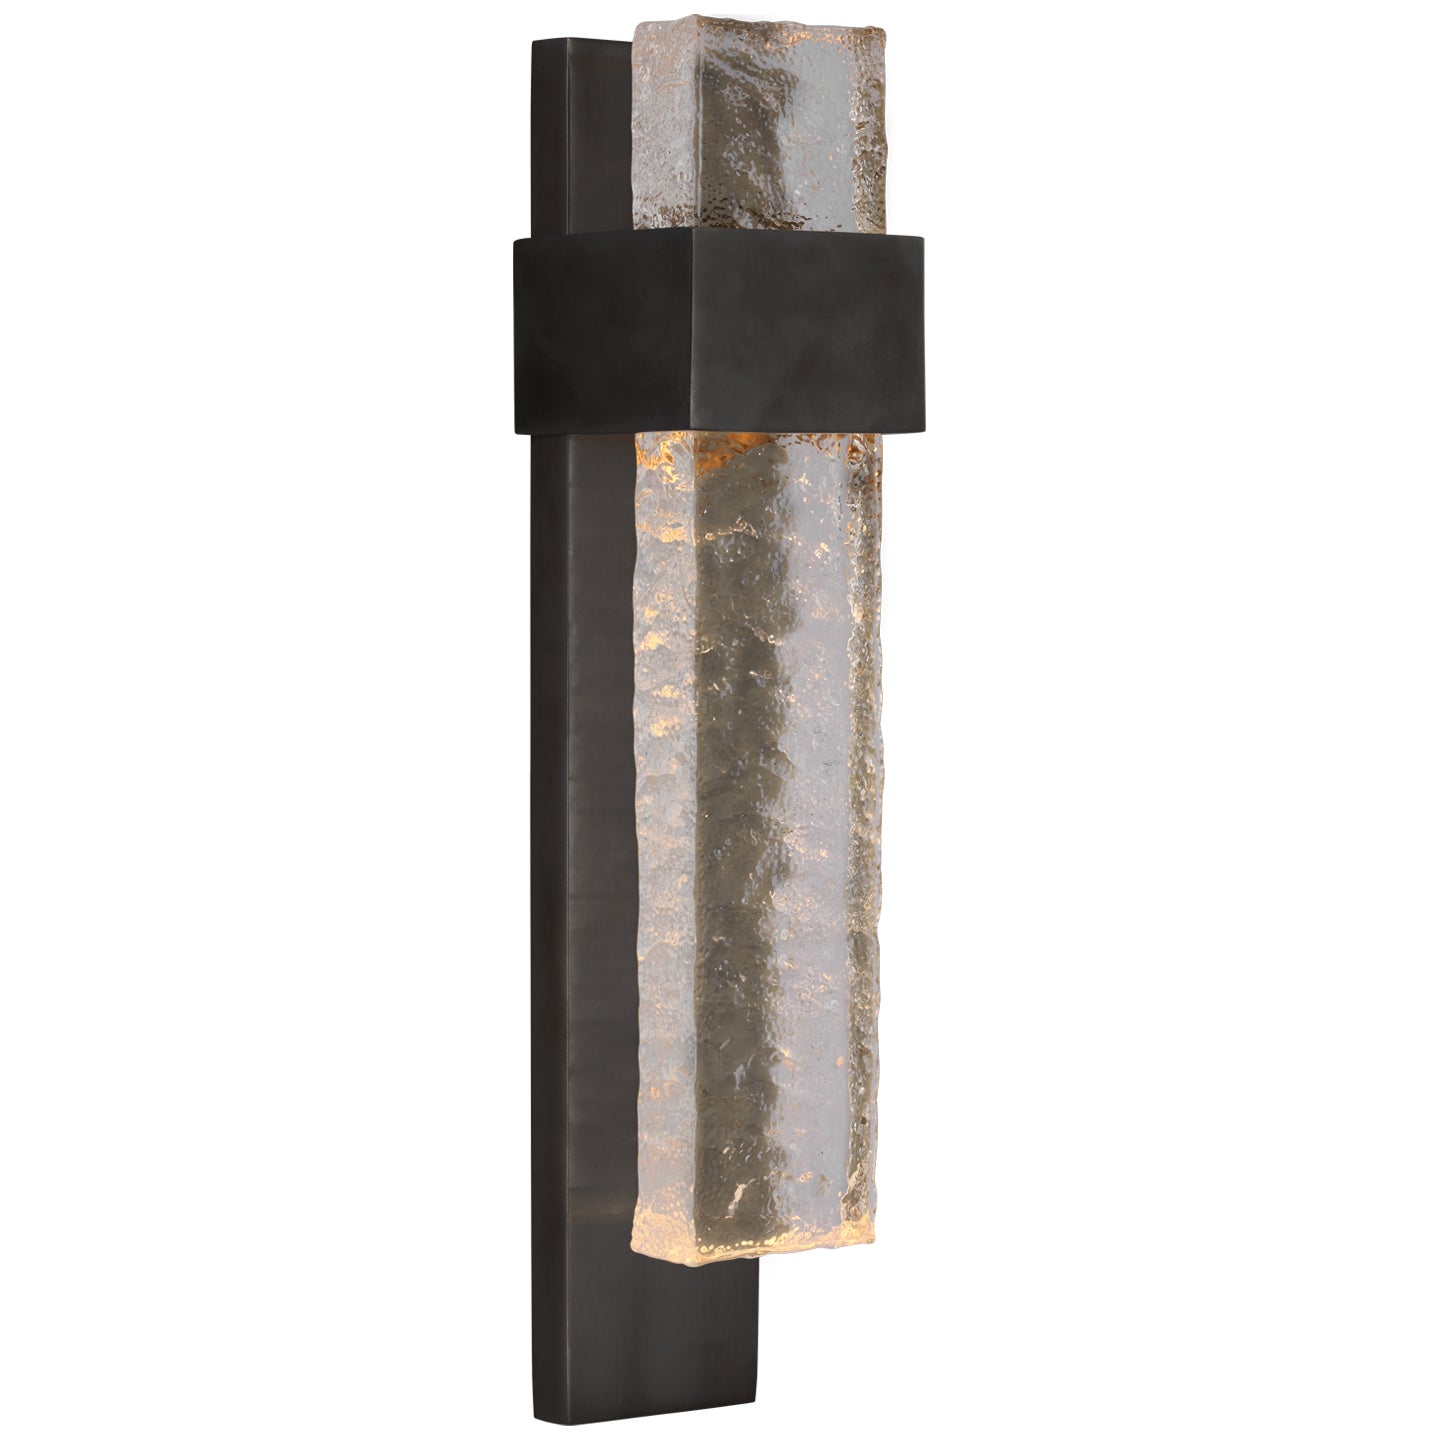 Wimberley Wall Sconce by Visual Comfort Signature at